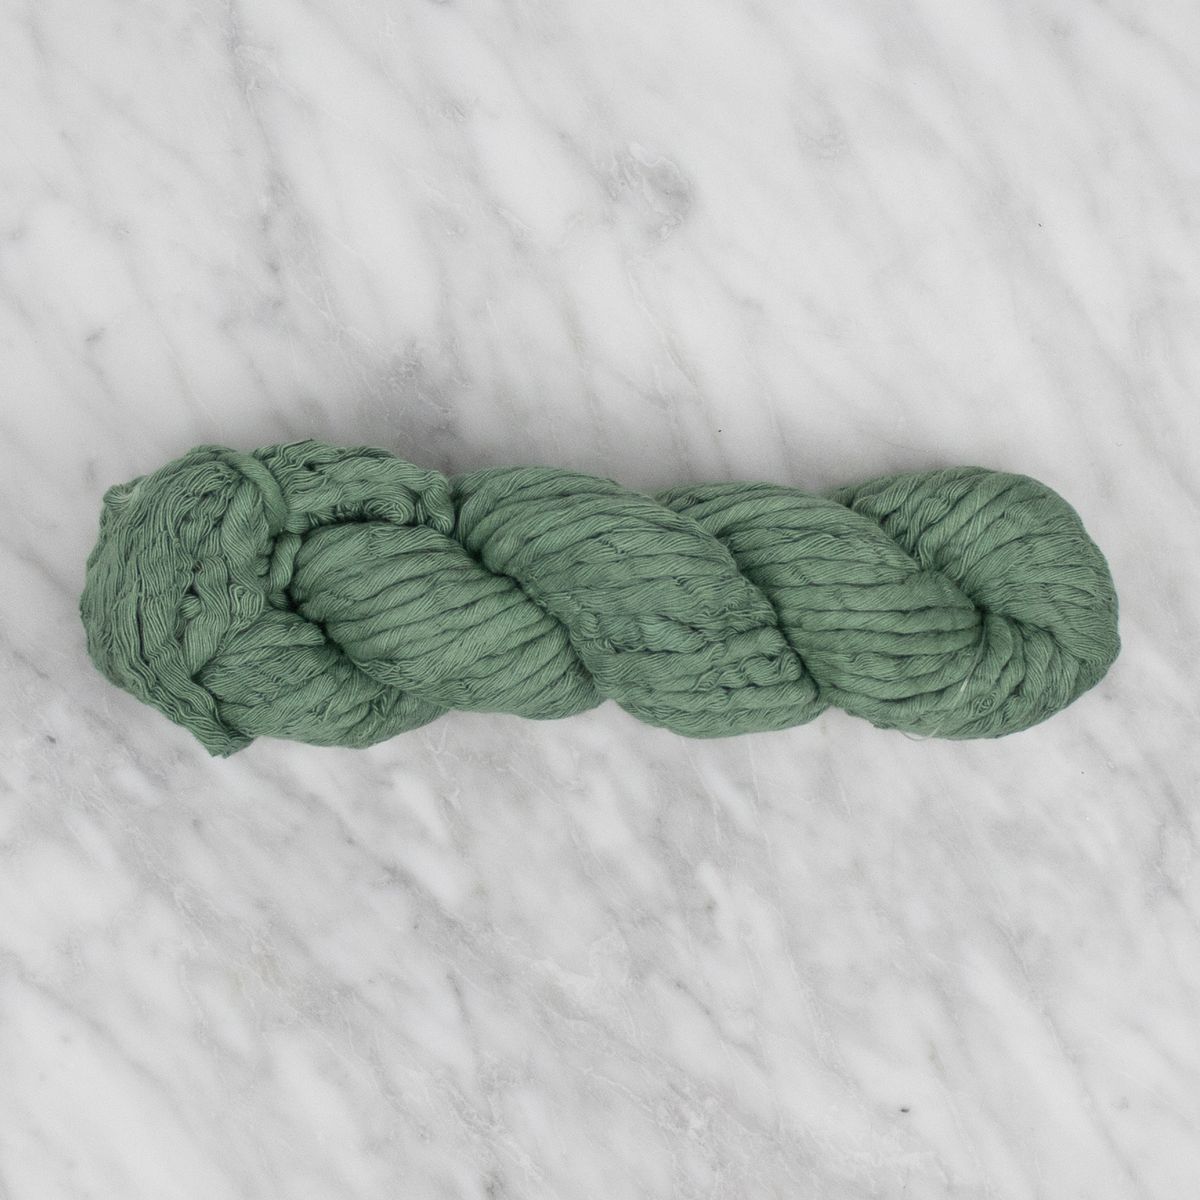 5mm Hand-Dyed Cotton String - Spearmint - 100 grams